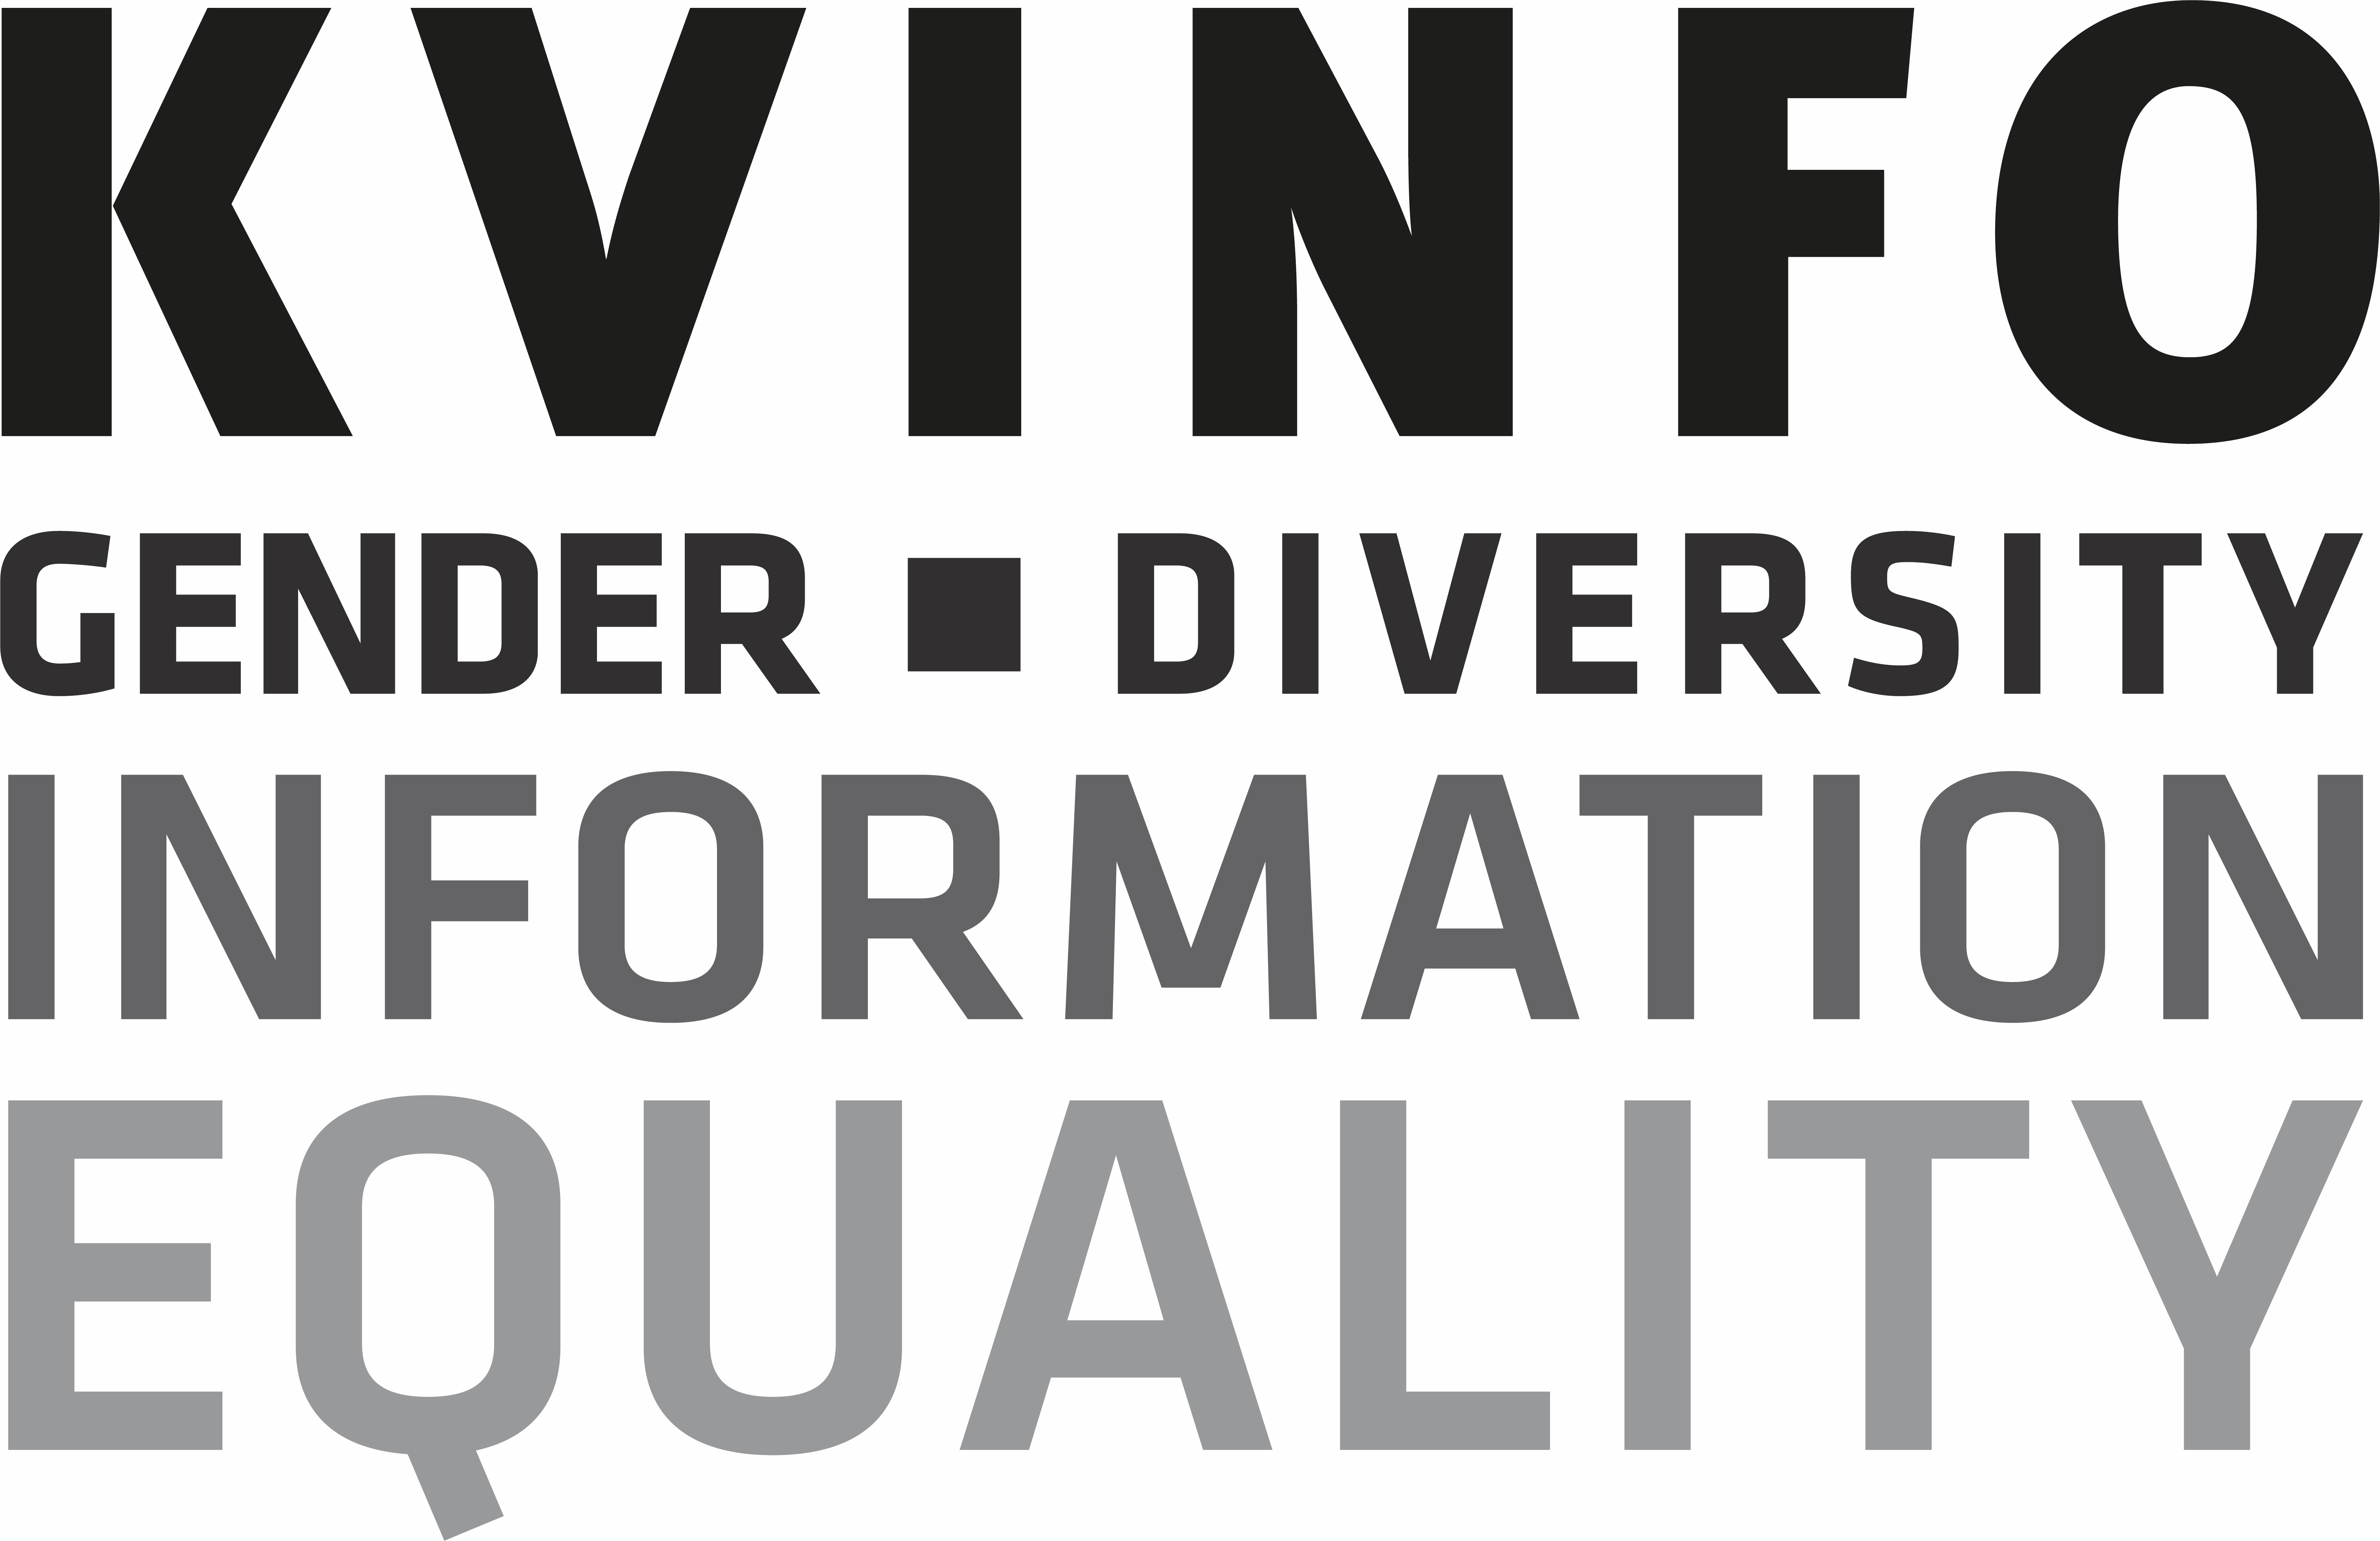 The Danish Centre for Research and Information on Gender, Equality and Diversity (KVINFO) logo